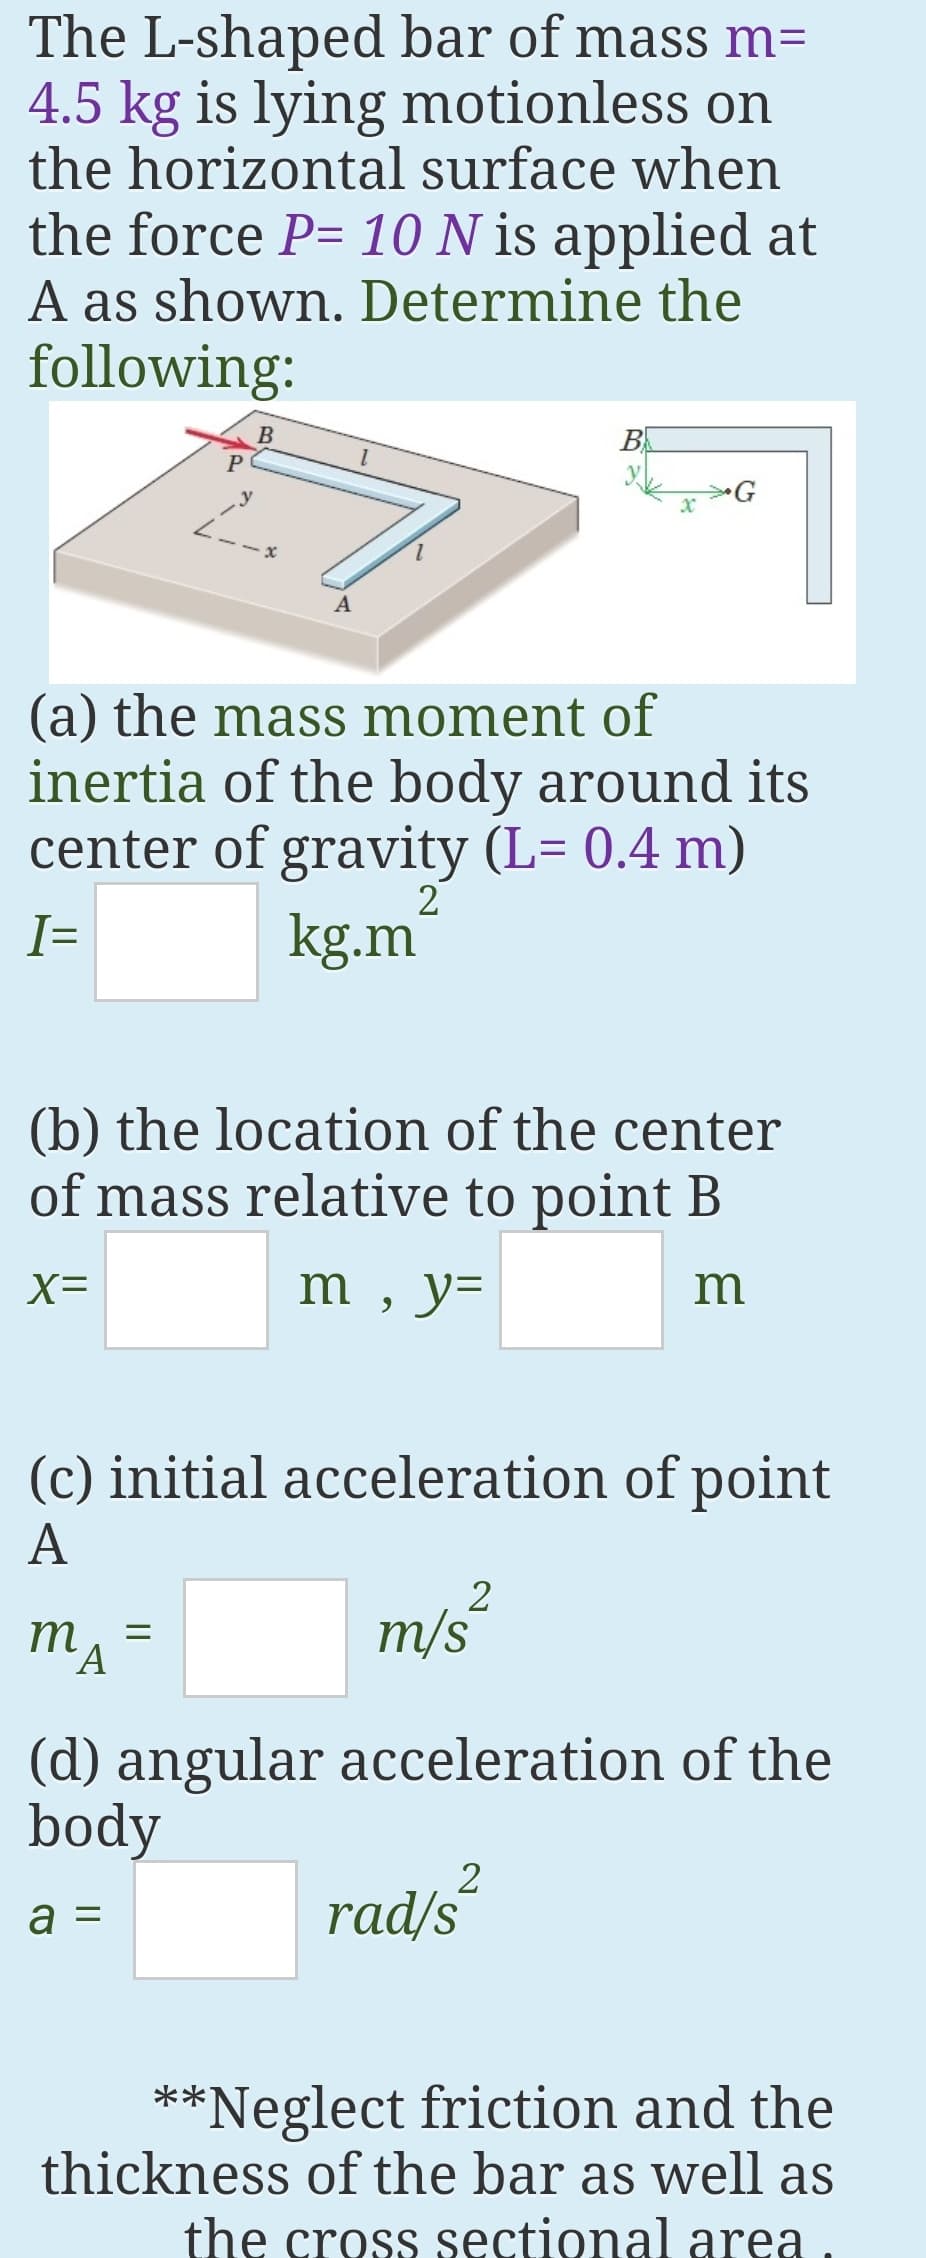 The L-shaped bar of mass m=
4.5 kg is lying motionless on
the horizontal surface when
the force P= 10 N is applied at
A as shown. Determine the
following:
B
B
(a) the mass moment of
inertia of the body around its
center of gravity (L= 0.4 m)
I=
kg.m
(b) the location of the center
of mass relative to point B
X=
m , y=
m
(c) initial acceleration of point
А
2
MA
m/s
m
(d) angular acceleration of the
body
a =
rad/s
**Neglect friction and the
thickness of the bar as well as
the cross sectional area.
